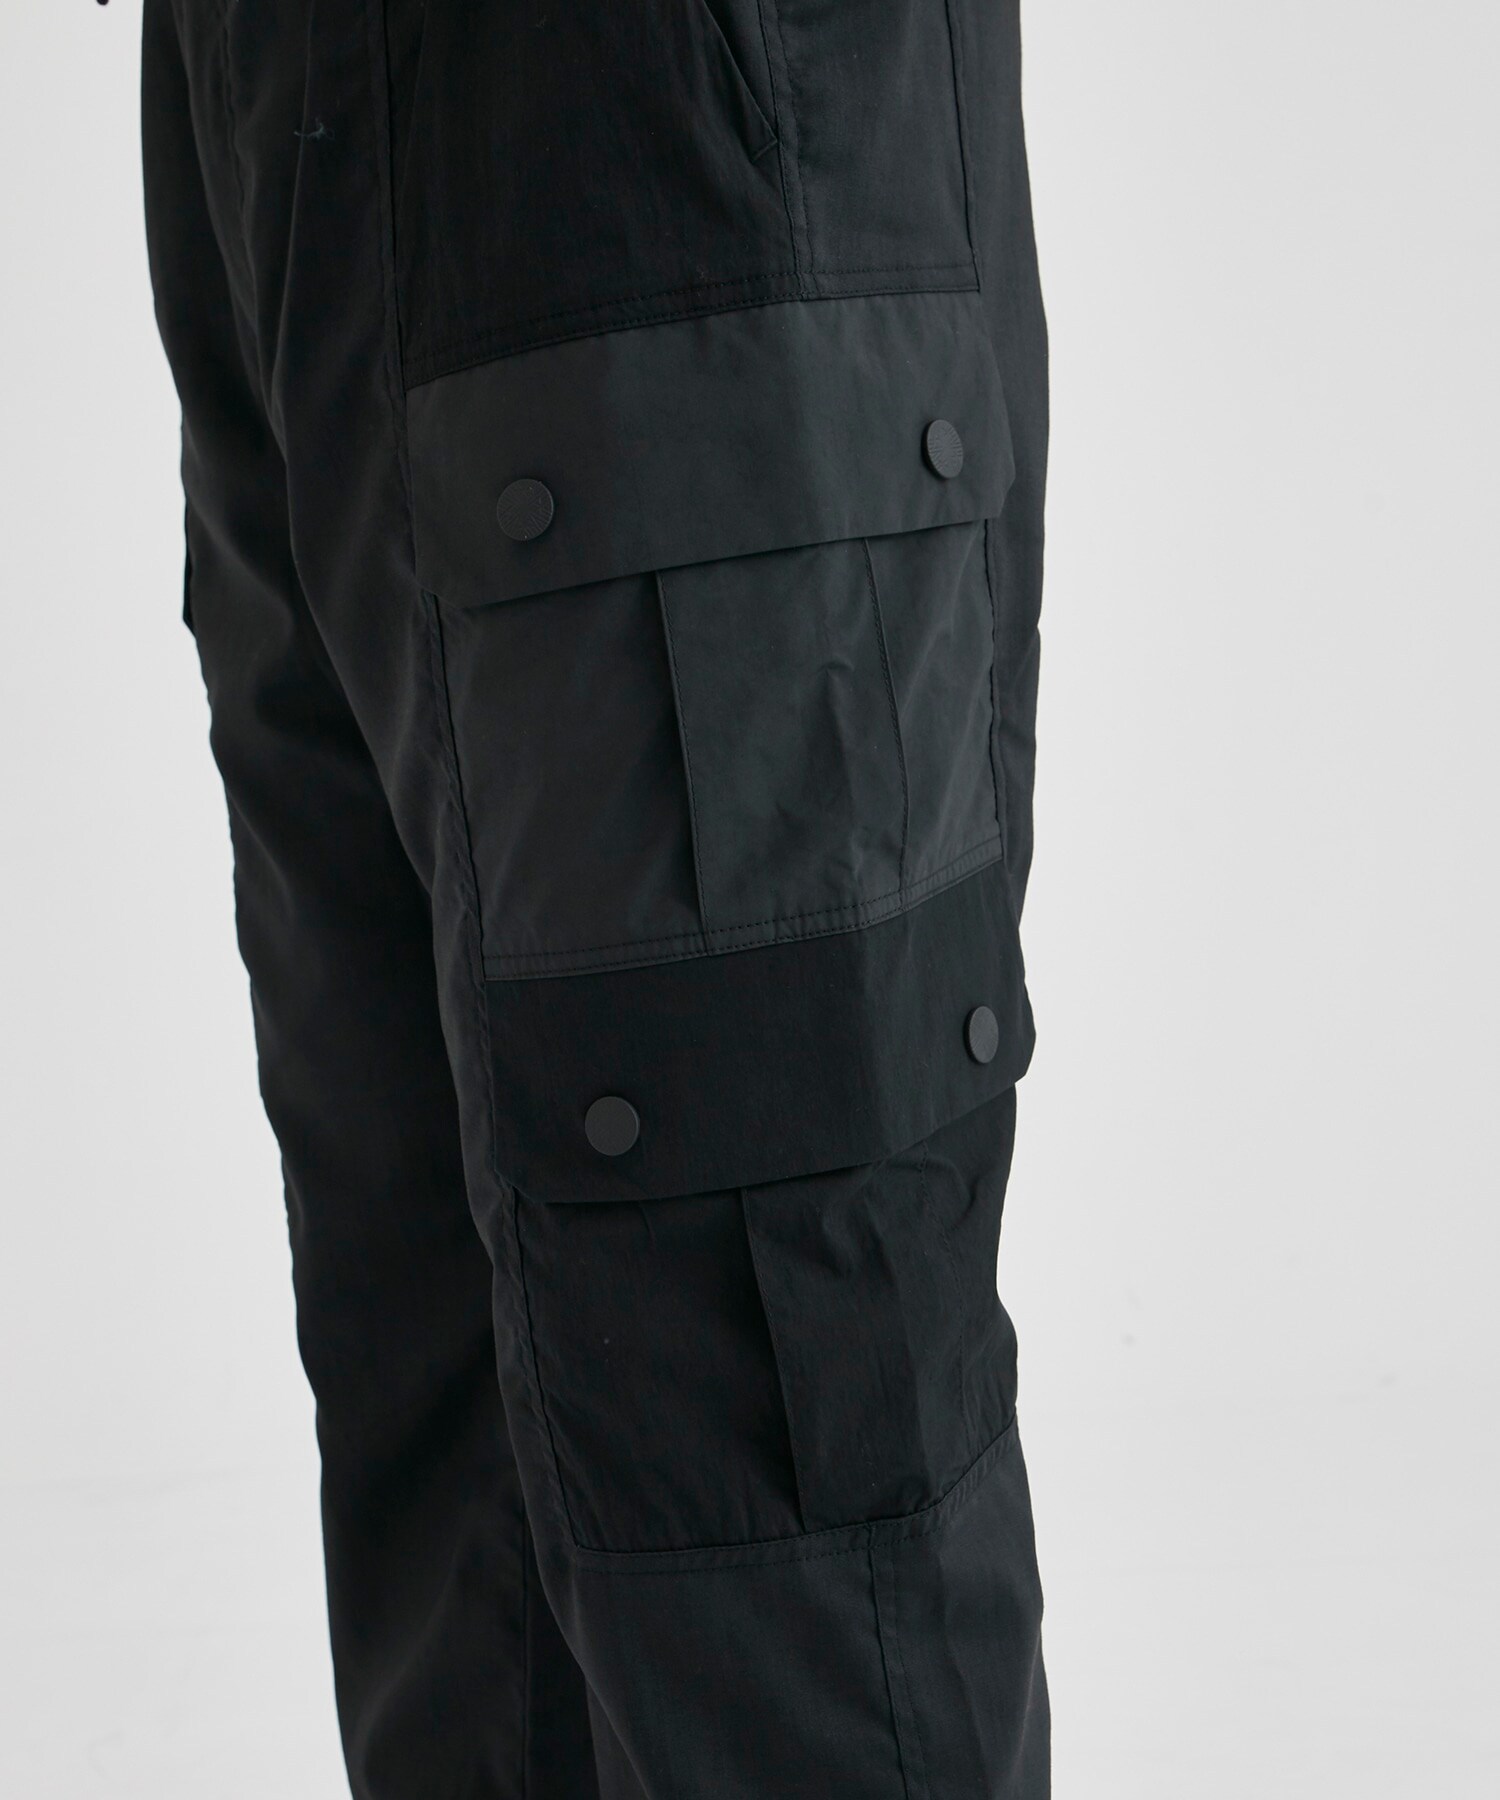 STRETCH CARGO JOGGER PANTS White Mountaineering